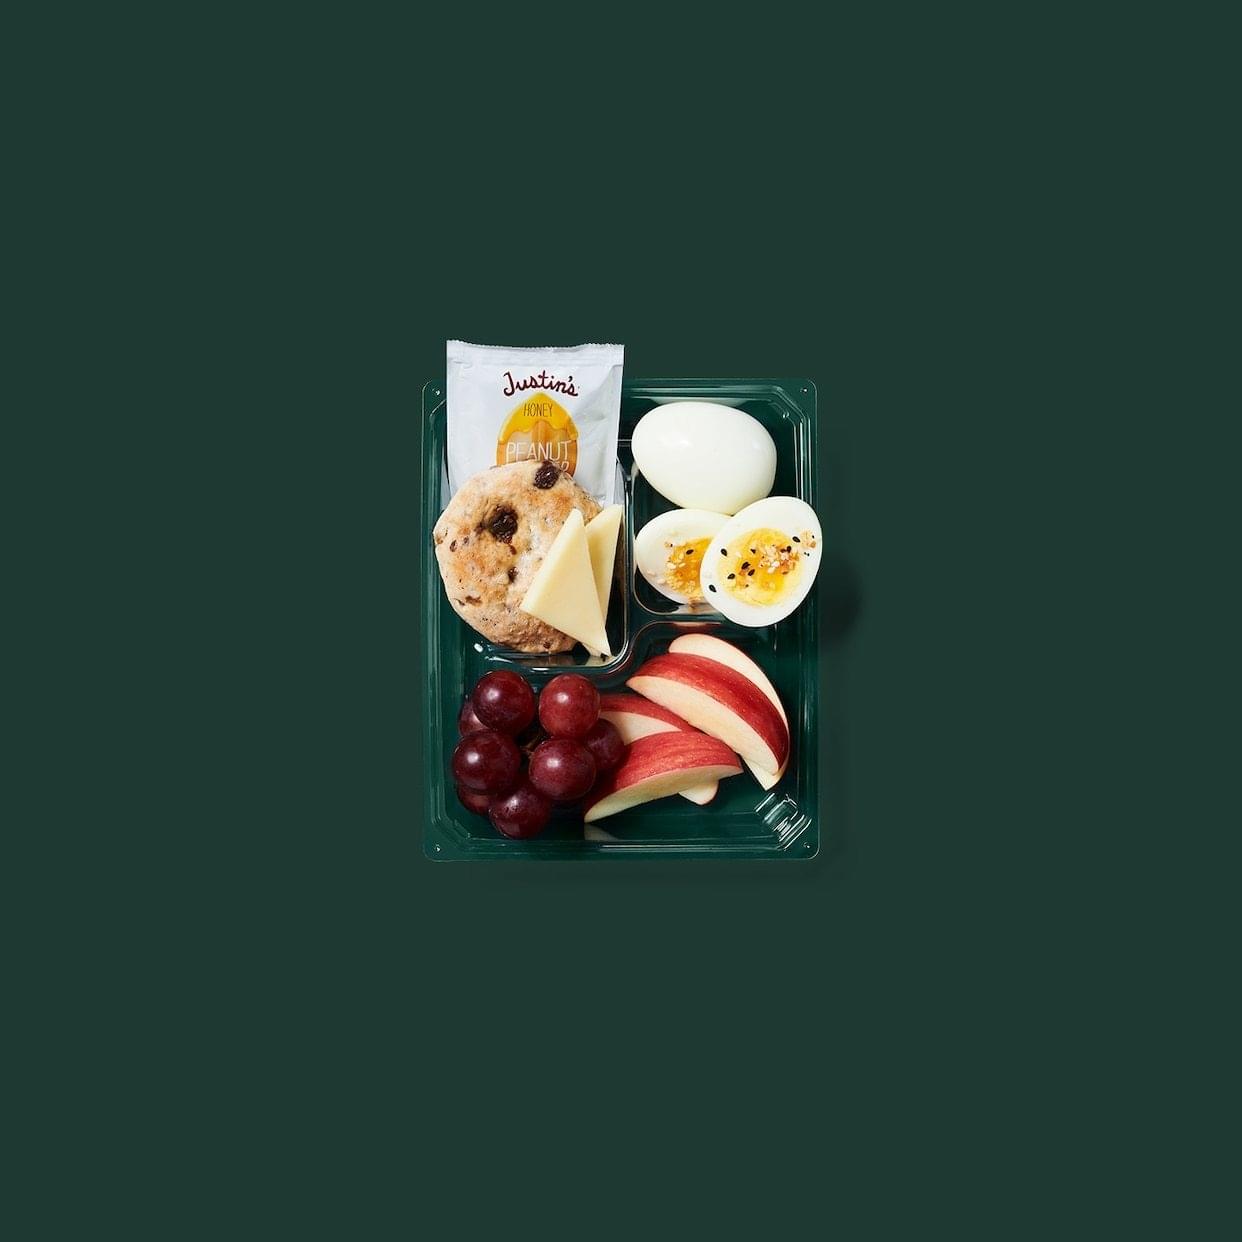 Starbucks Eggs & Cheese Protein Box Nutrition Facts